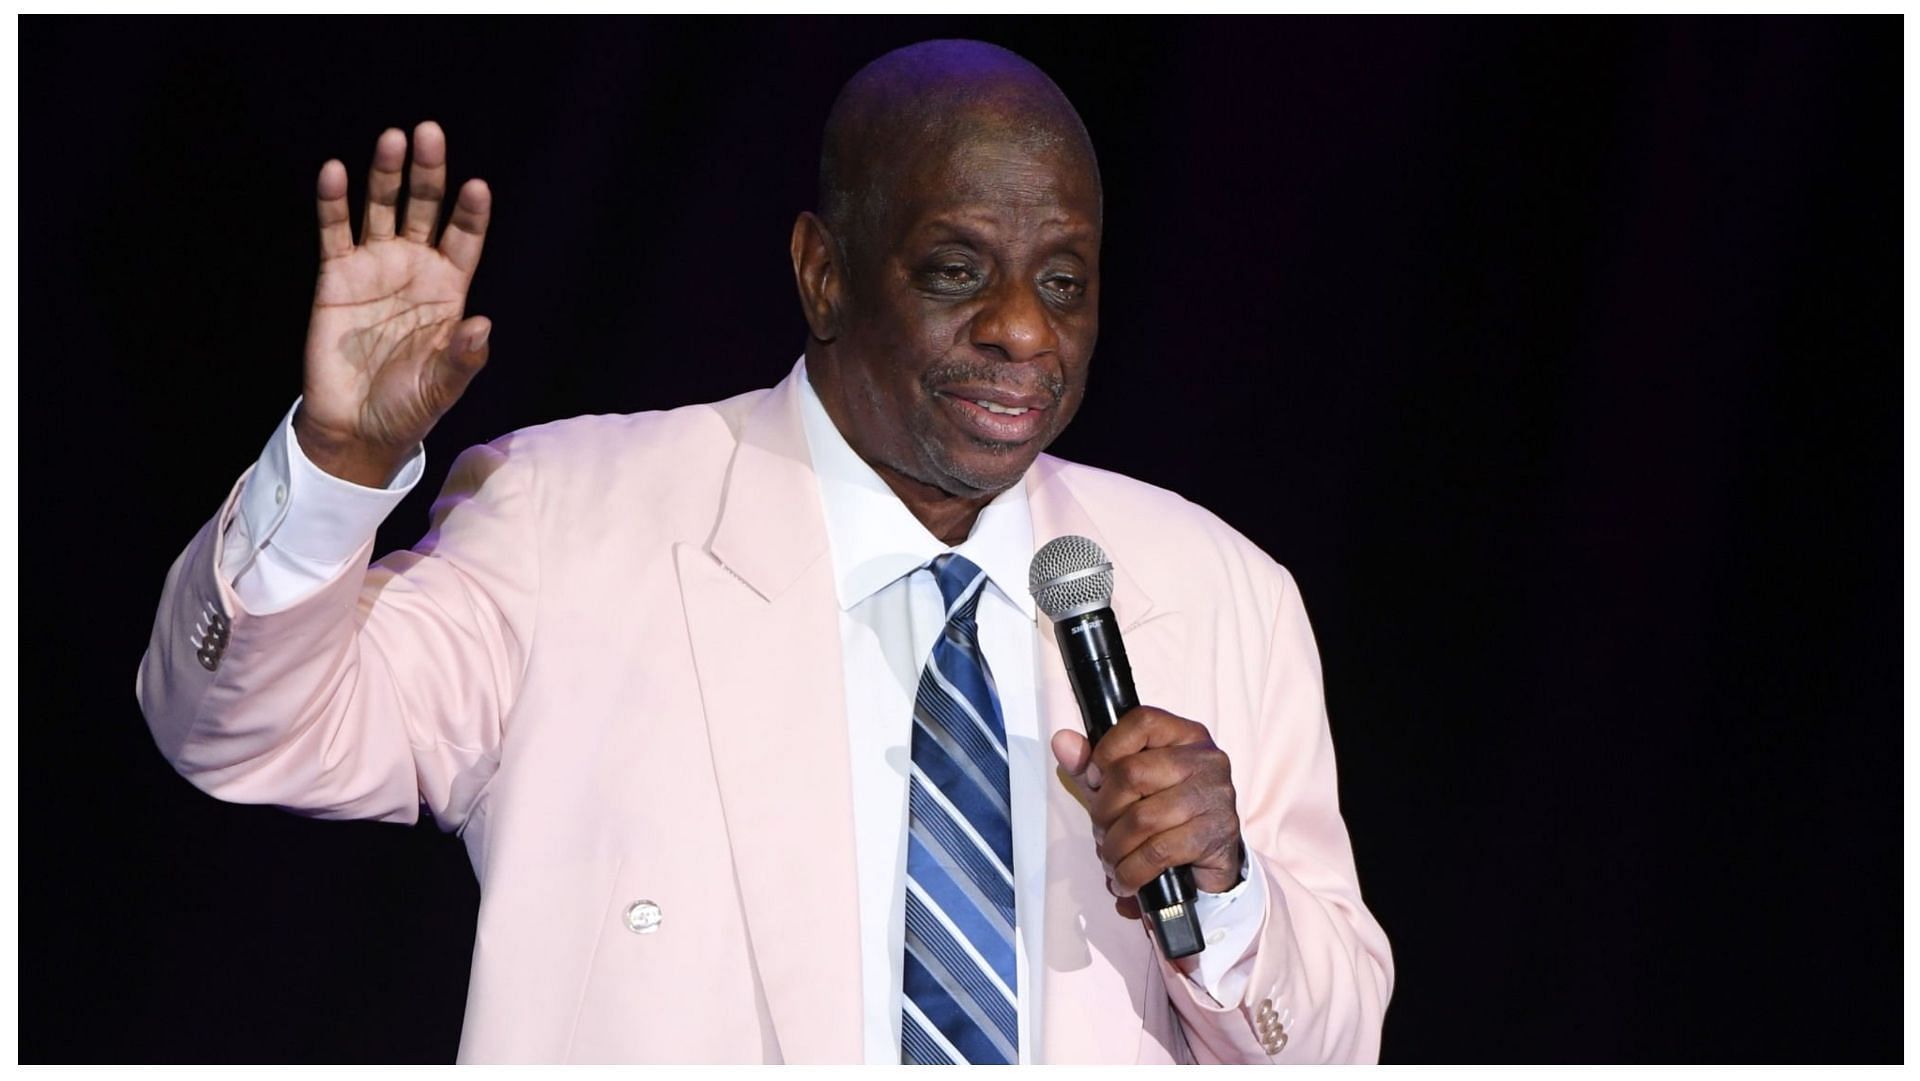 Jimmie Walker denied his death rumors in a Facebook post (Image via Ethan Miller/Getty Images)